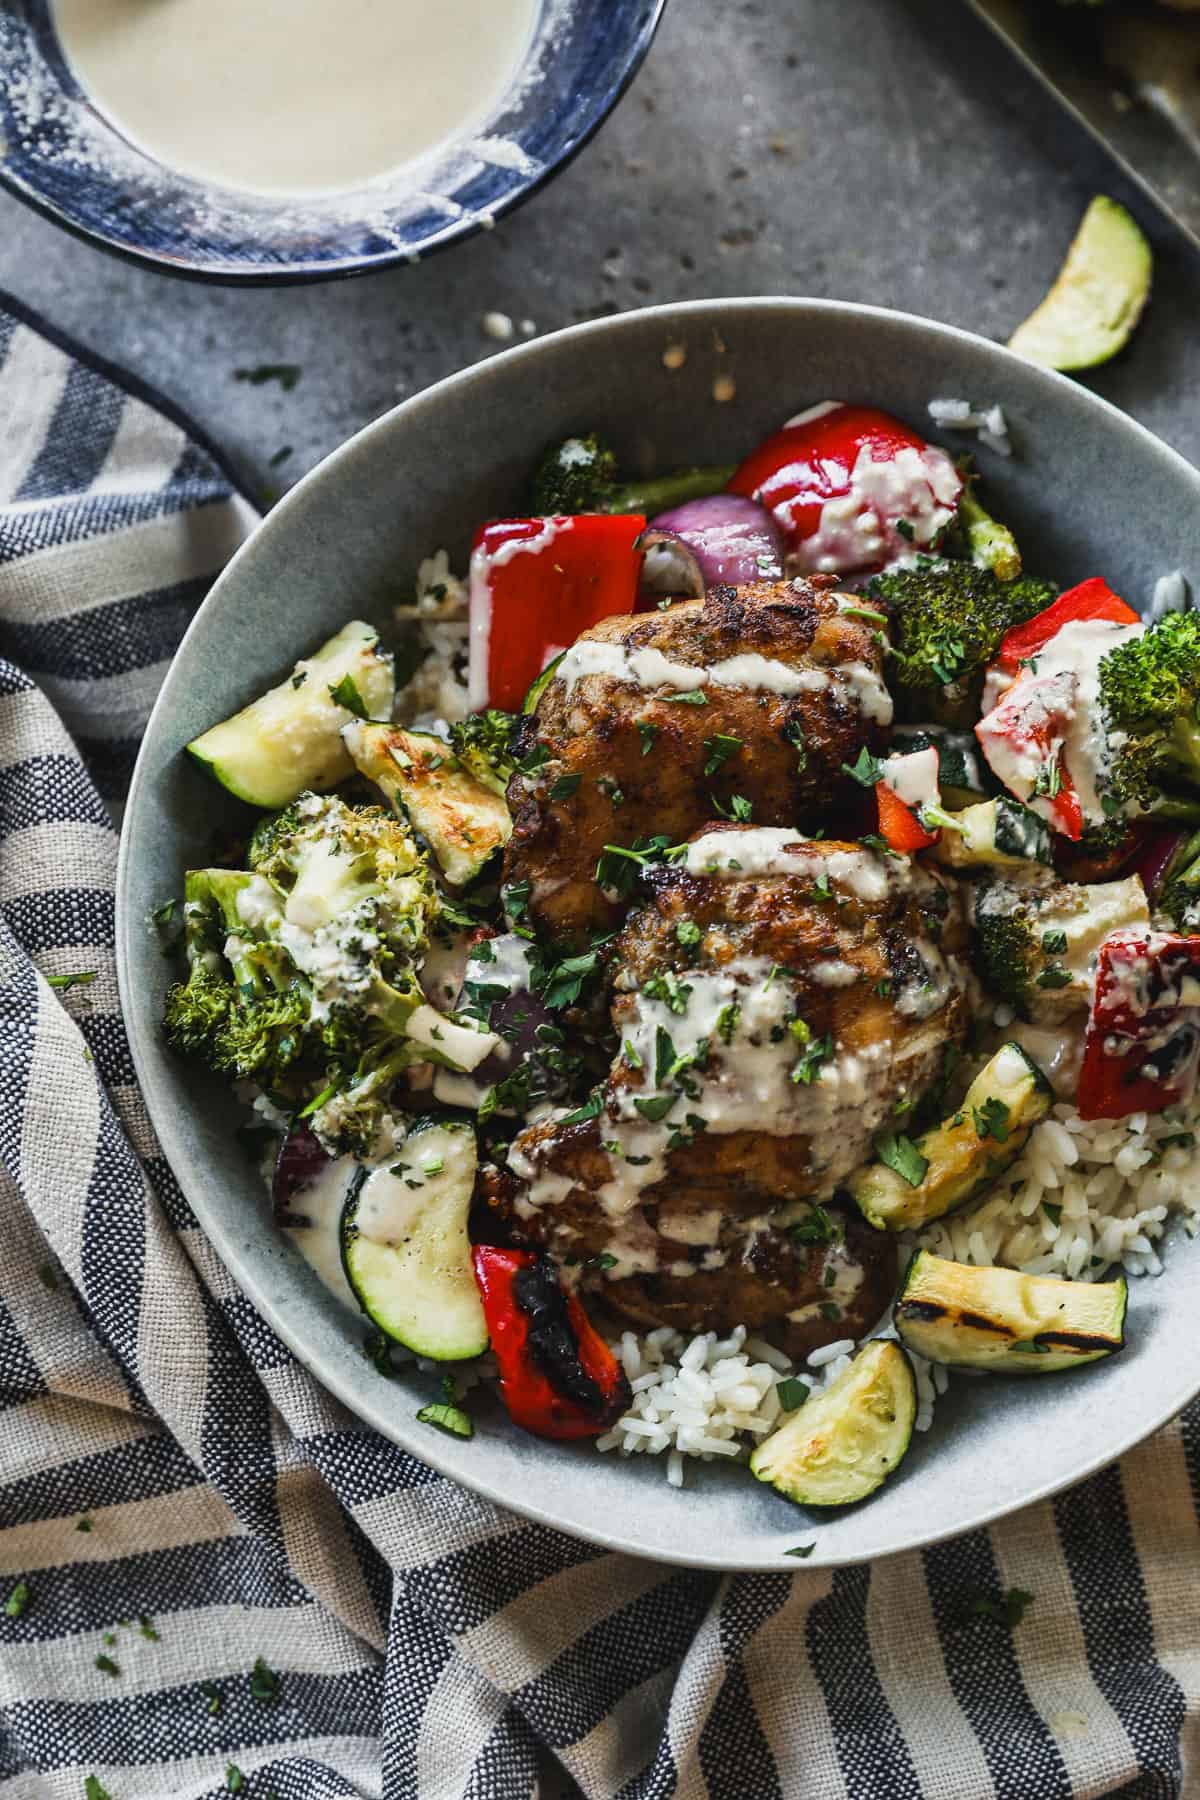 A homemade Chicken Tahini Bowl with grilled chicken and veggies on a bed of rice, and drizzled with tahini sauce and herbs.